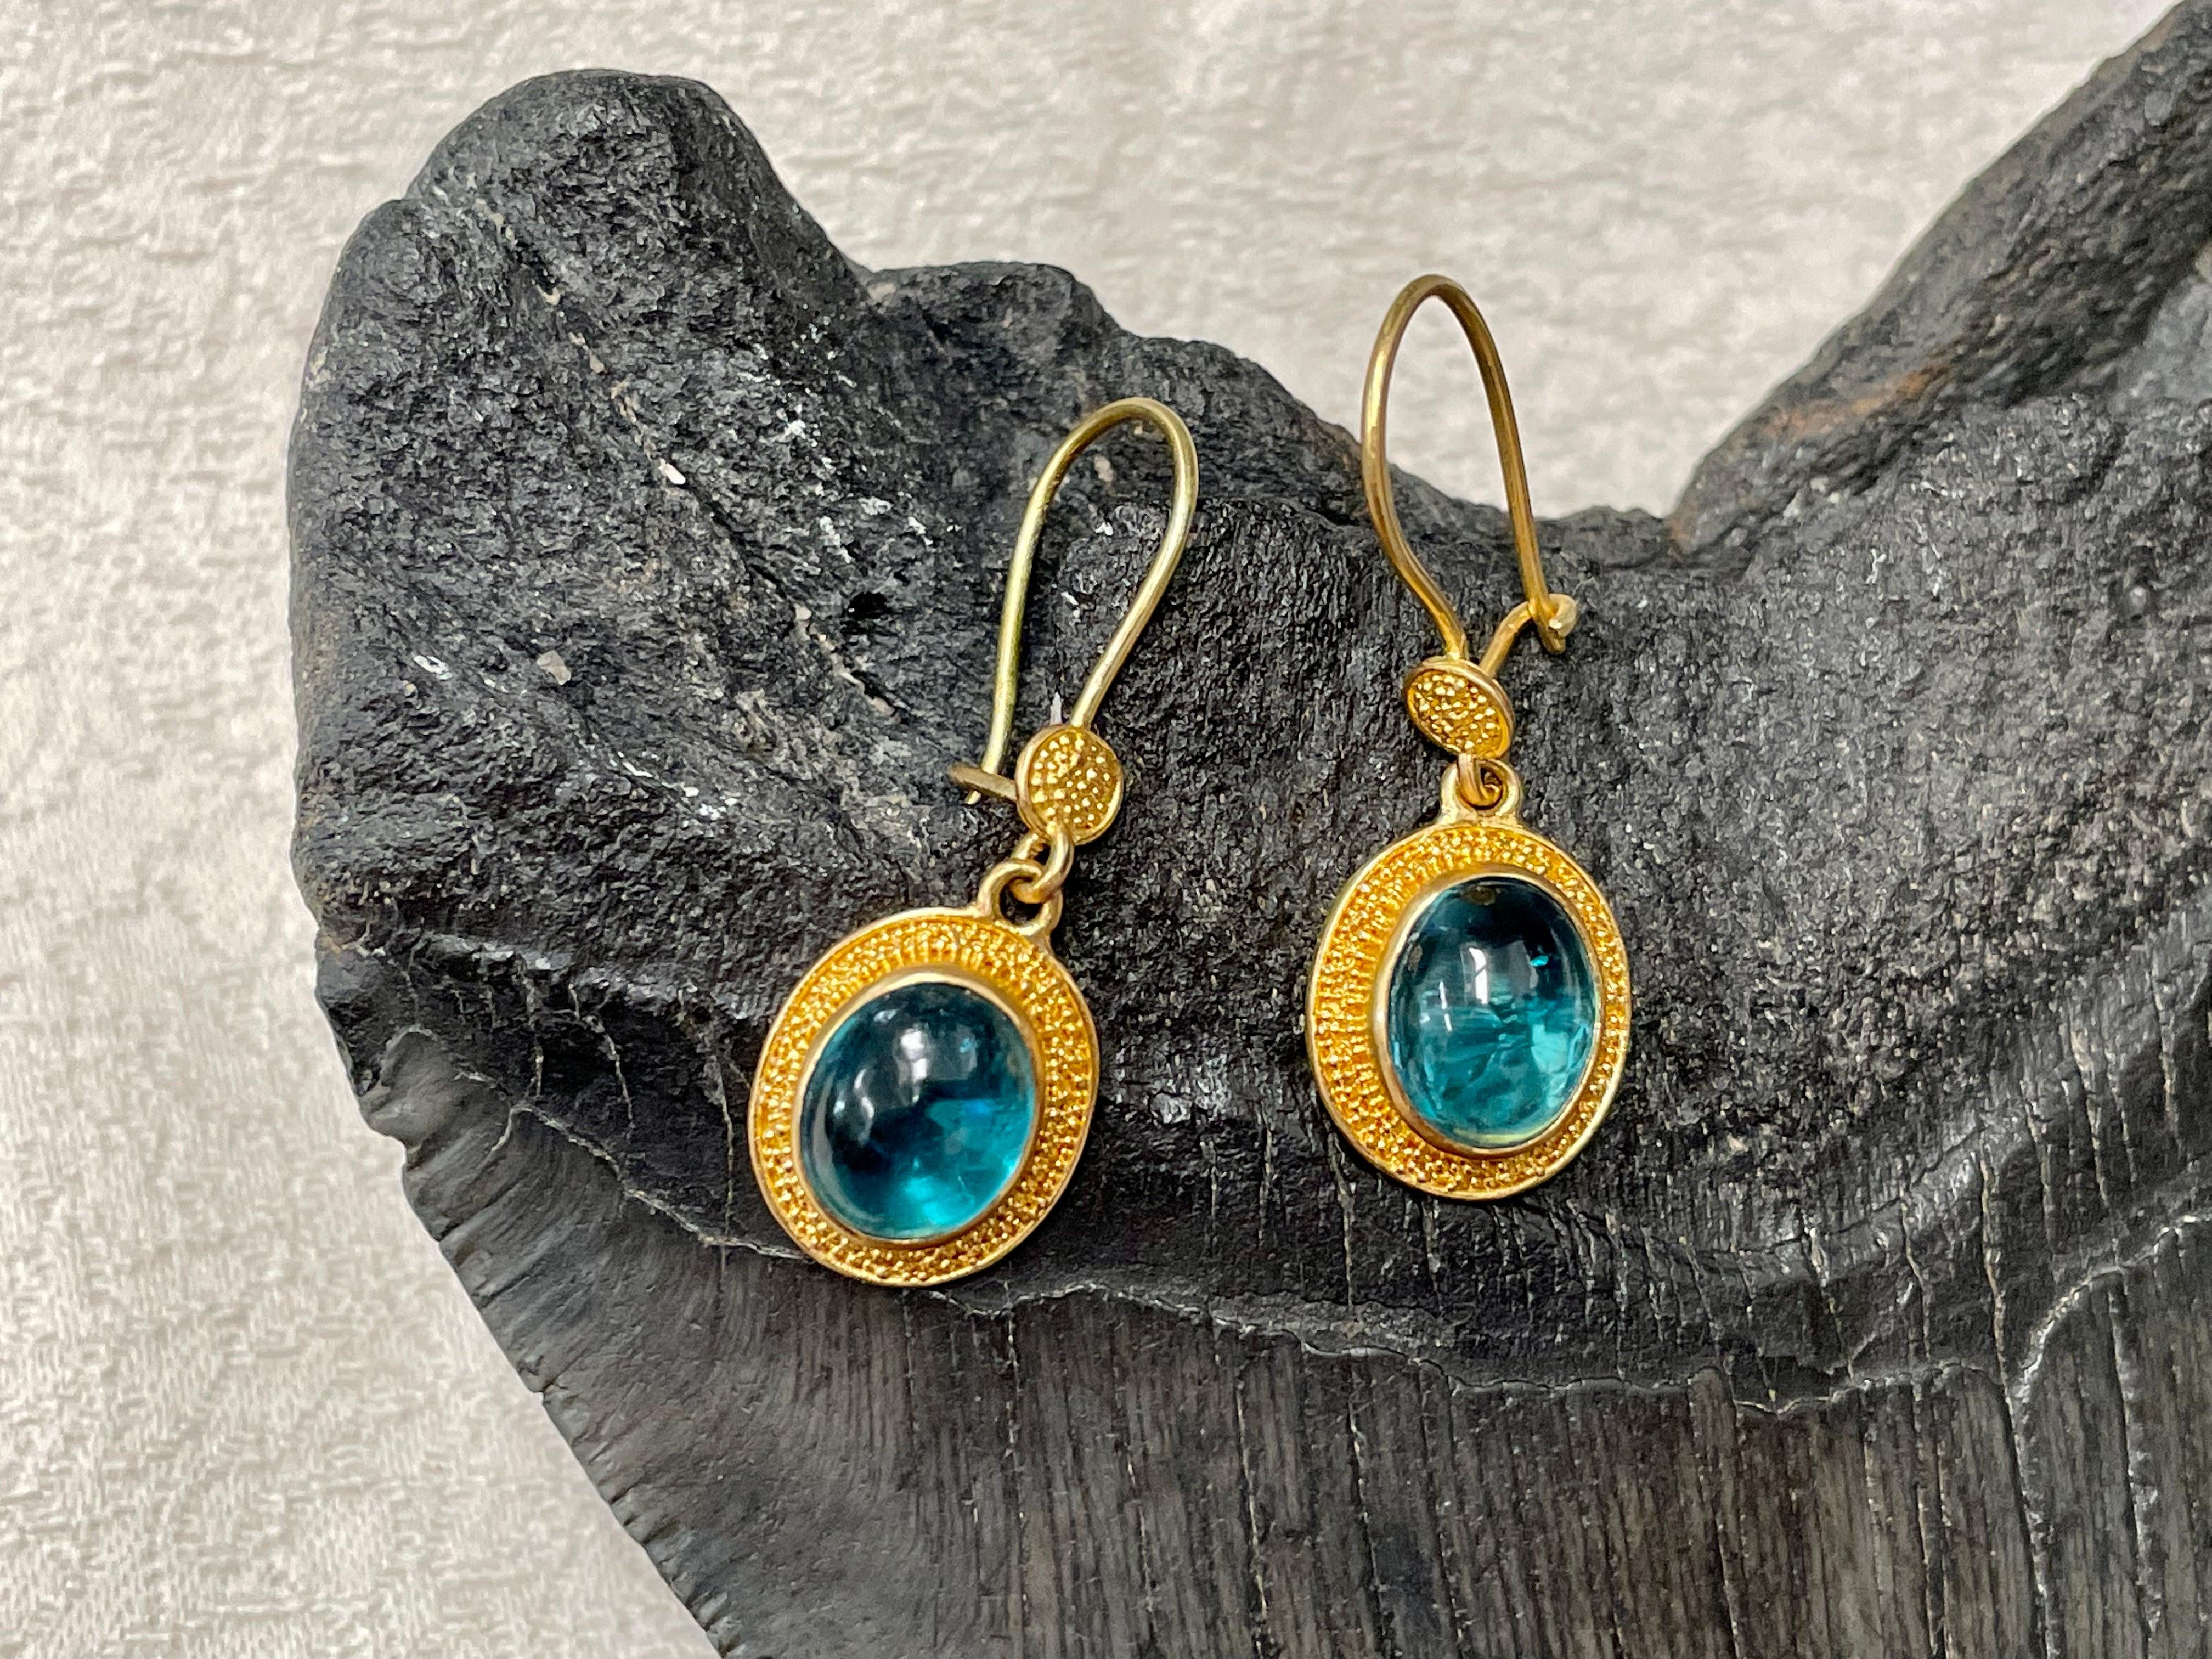 Steven Battelle 6.6 Carats Cabochon Apatite Ornate Wire 22K Gold Earrings In New Condition For Sale In Soquel, CA